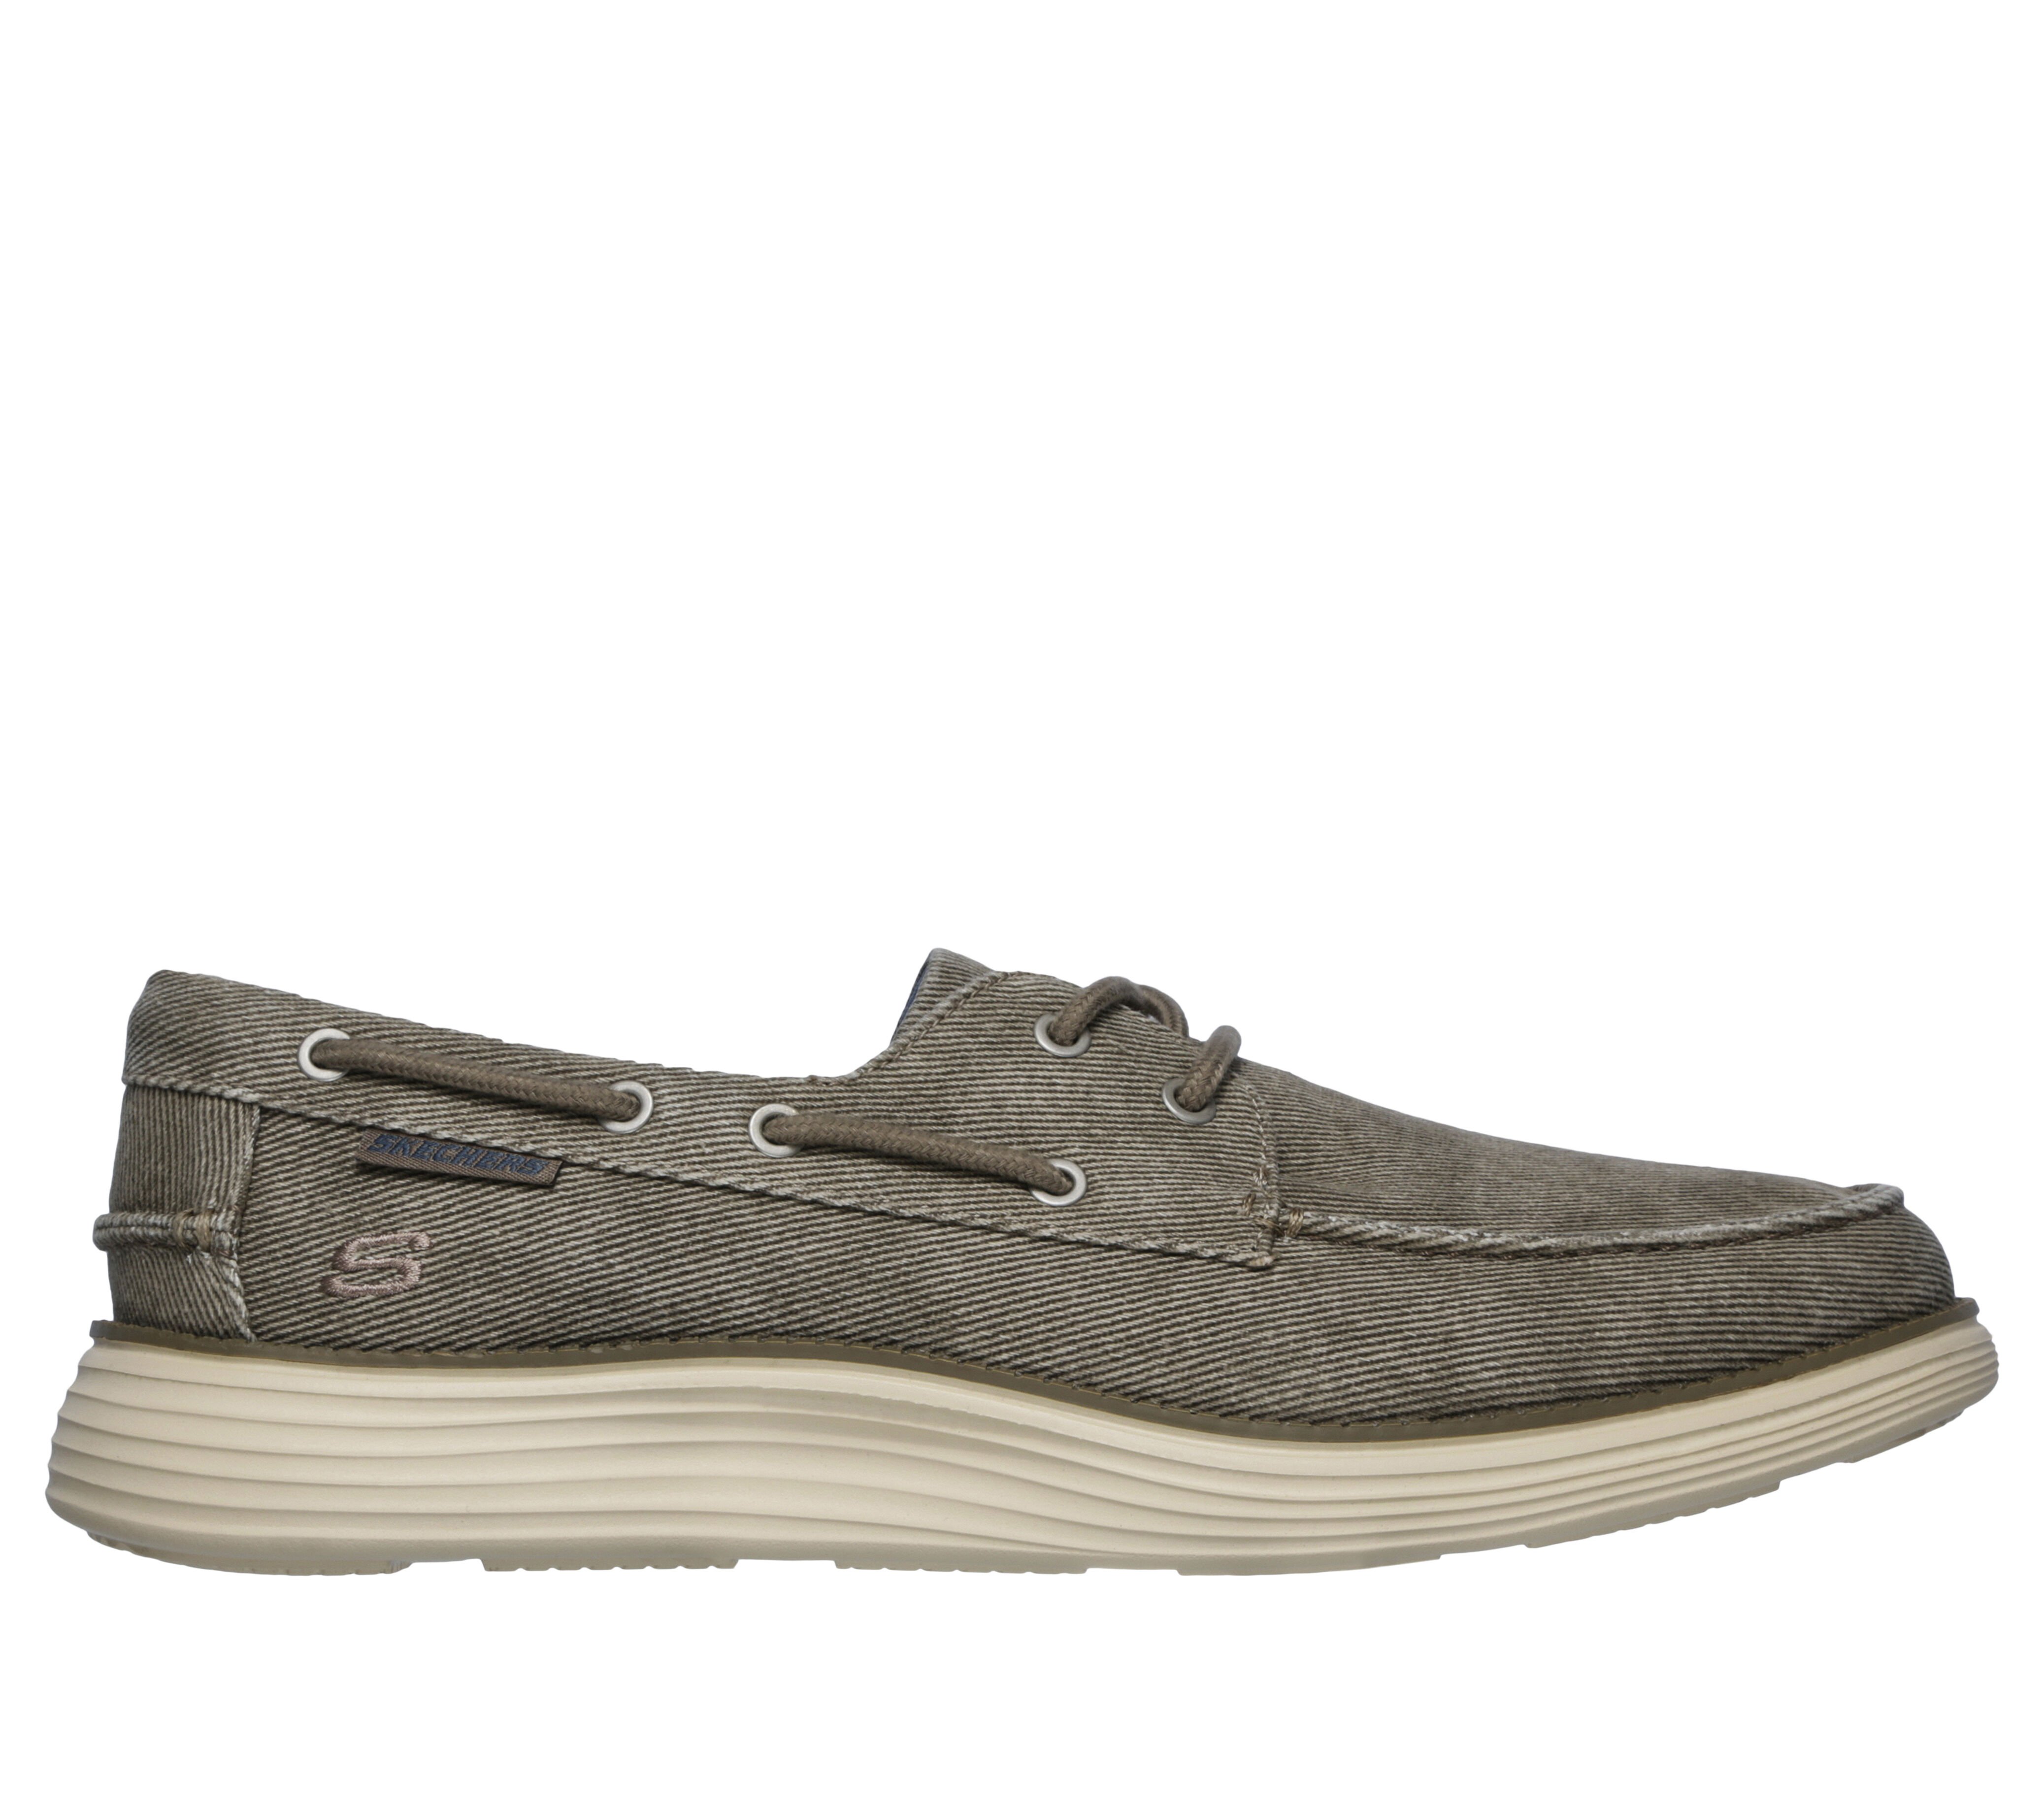 skechers top sider shoes